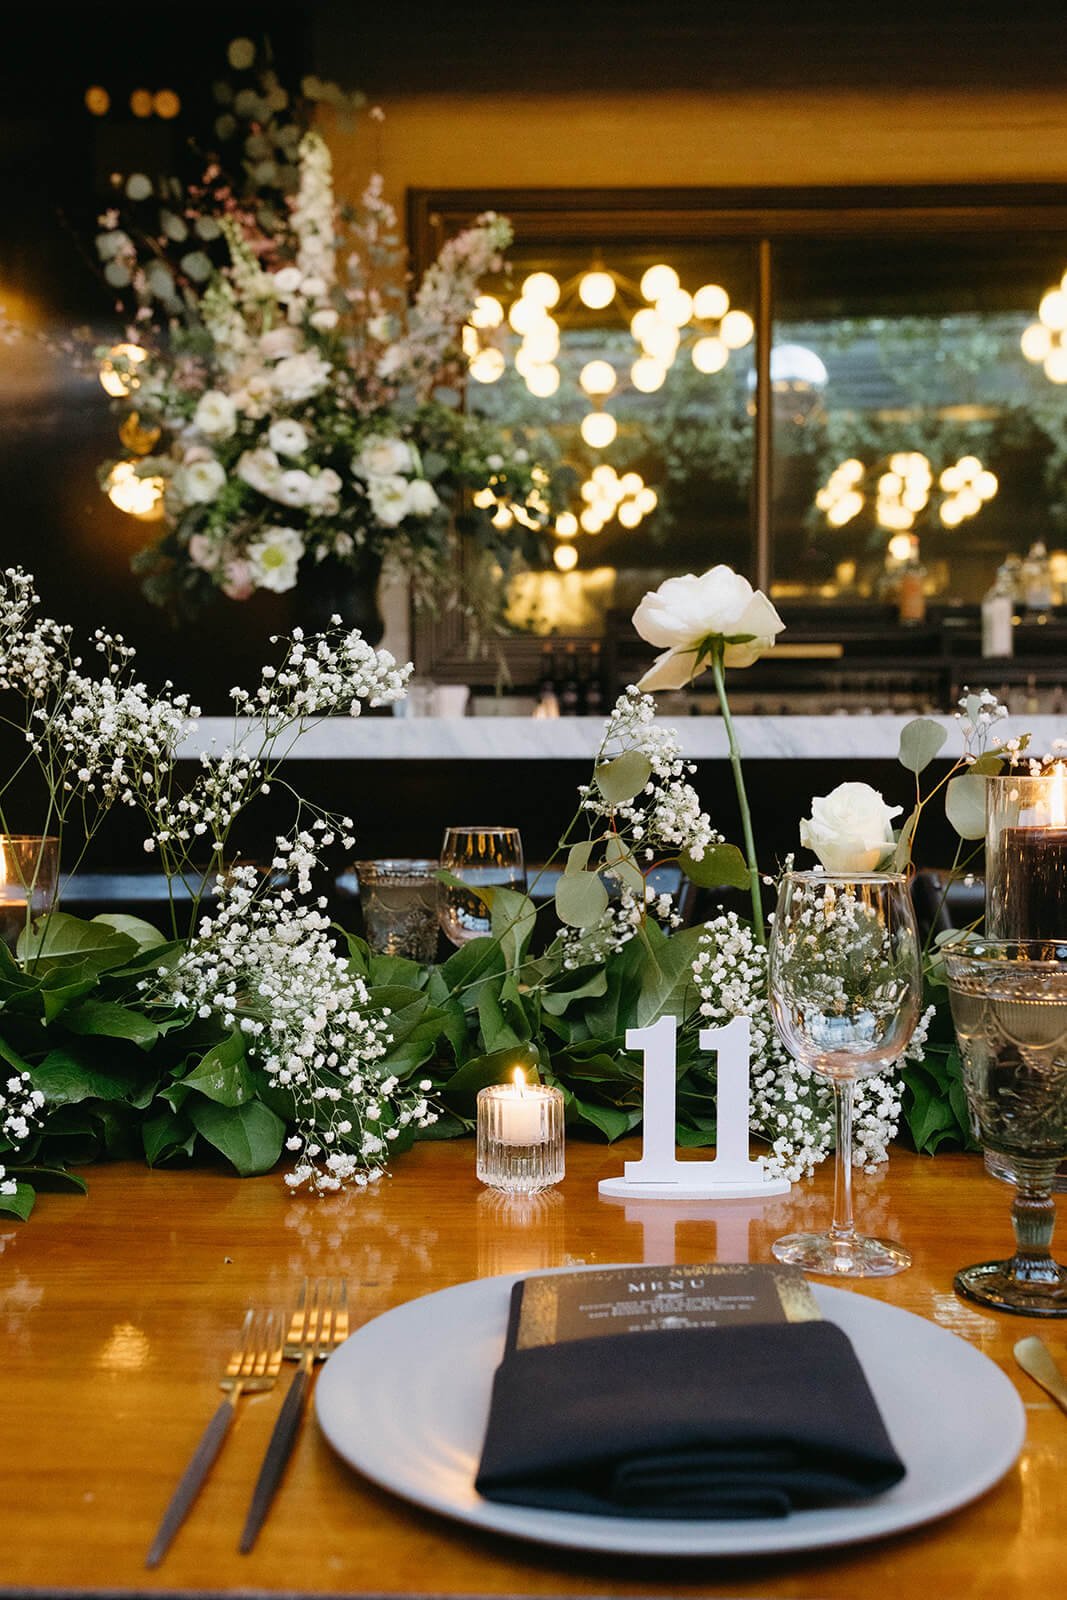 Artfully designed wedding table setting featuring soft-toned florals and elegant dinnerware, inviting guests to a sophisticated dining experience